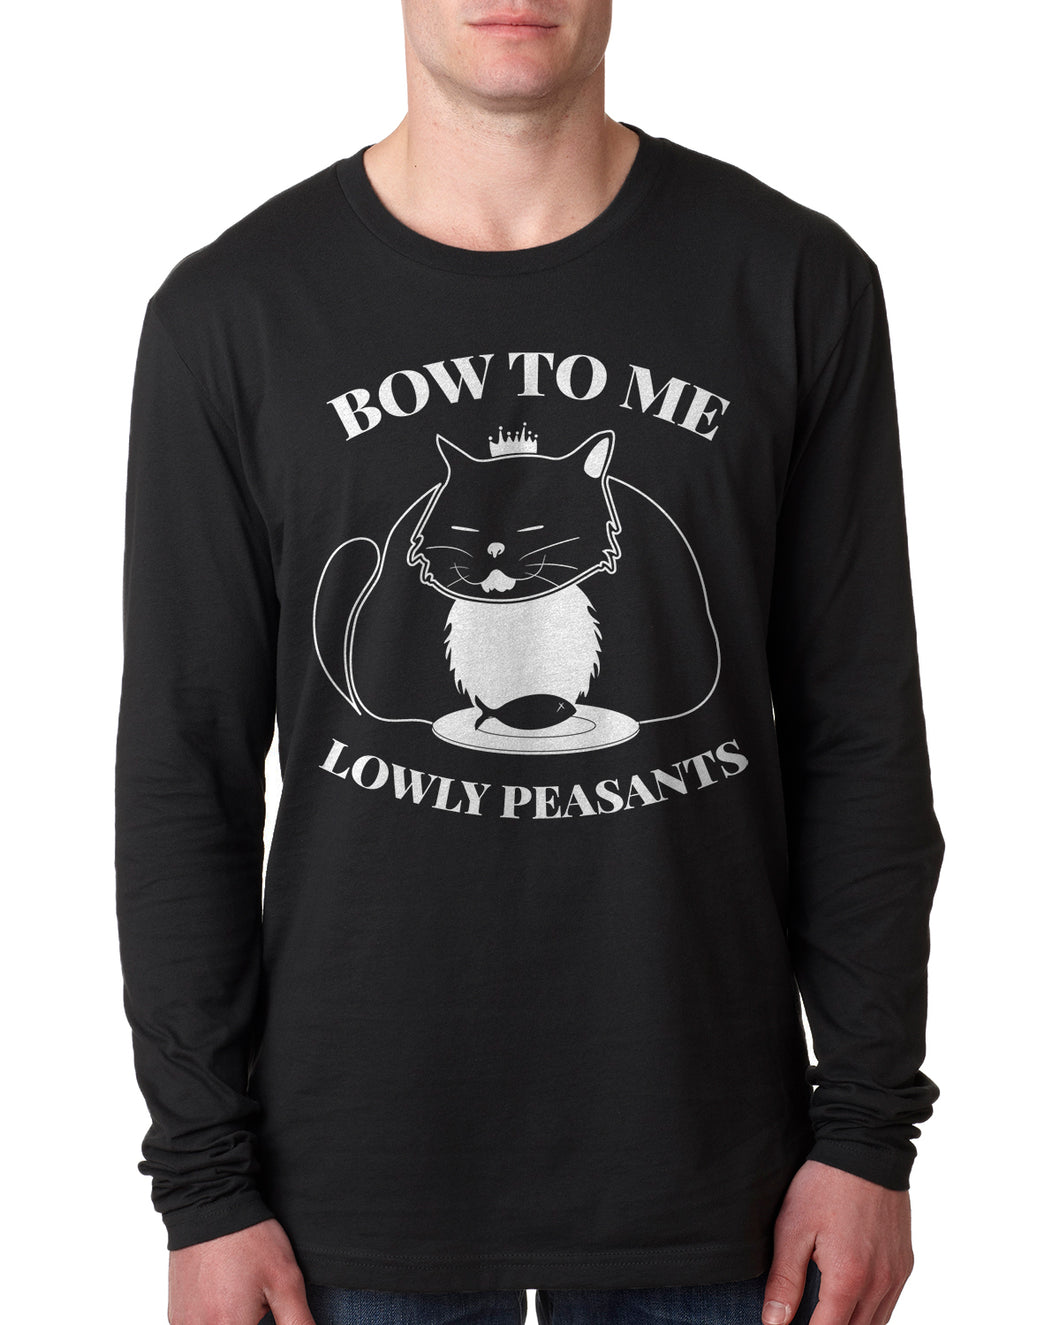 Bow To Me Lowly Peasants Cat Lover Long Sleeve Men's Shirt